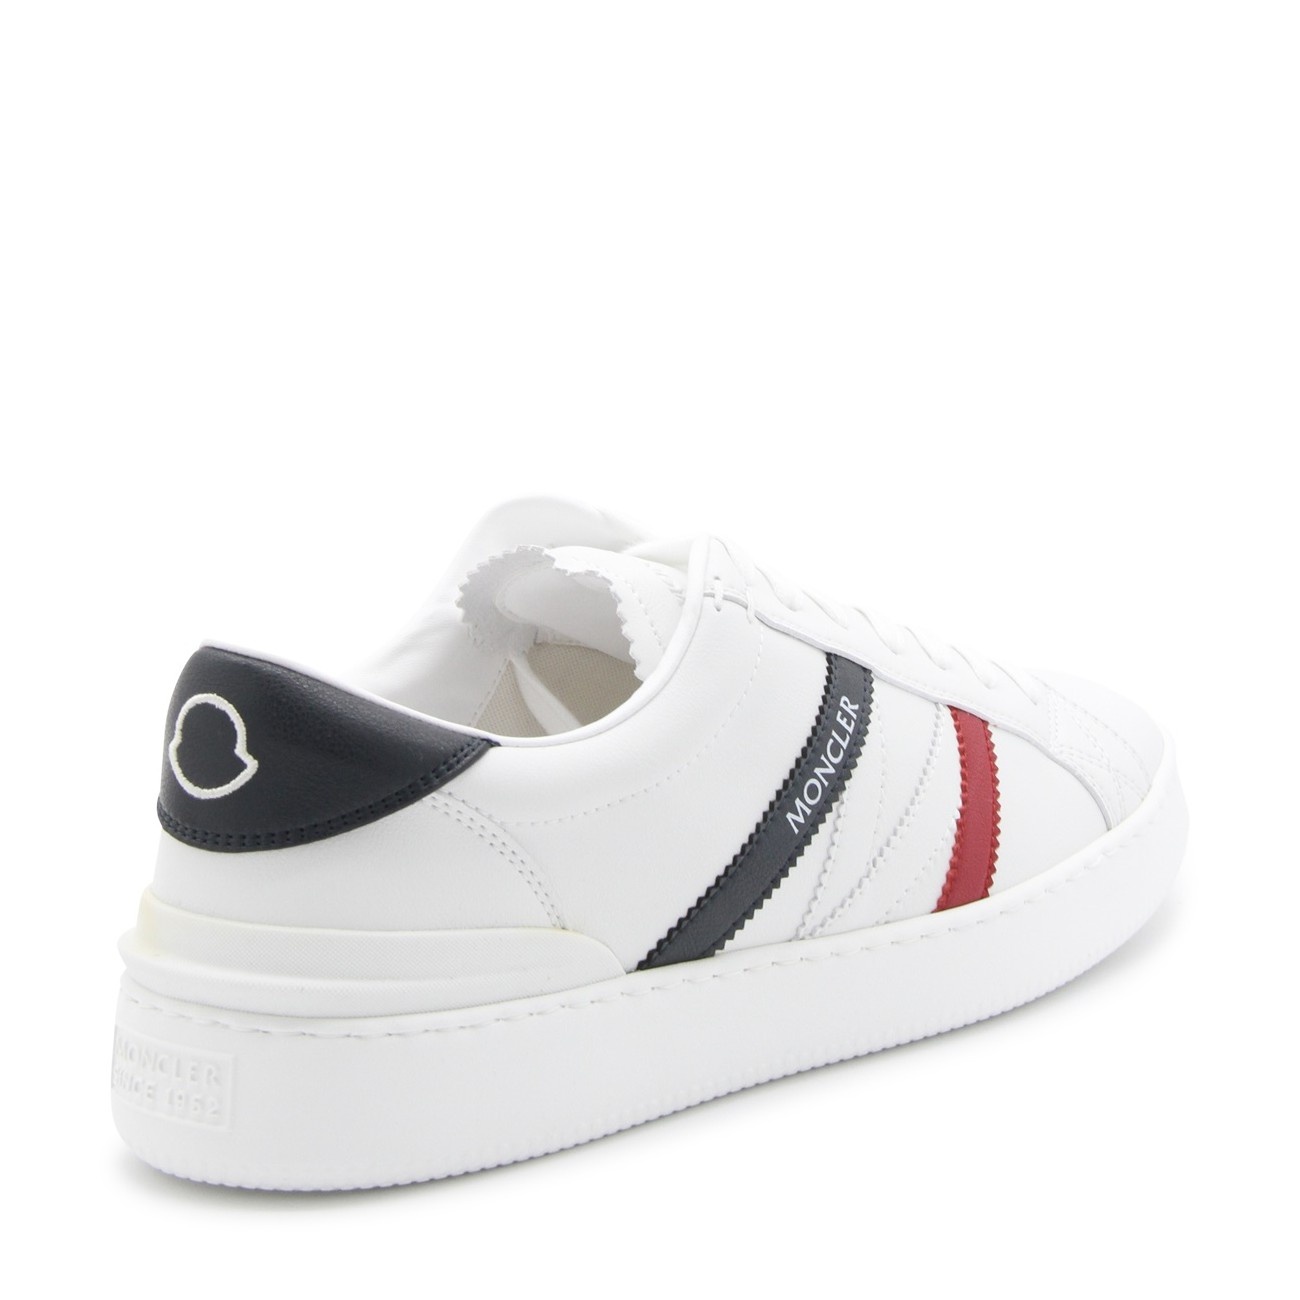 white, blue and red leather sneakers - 3